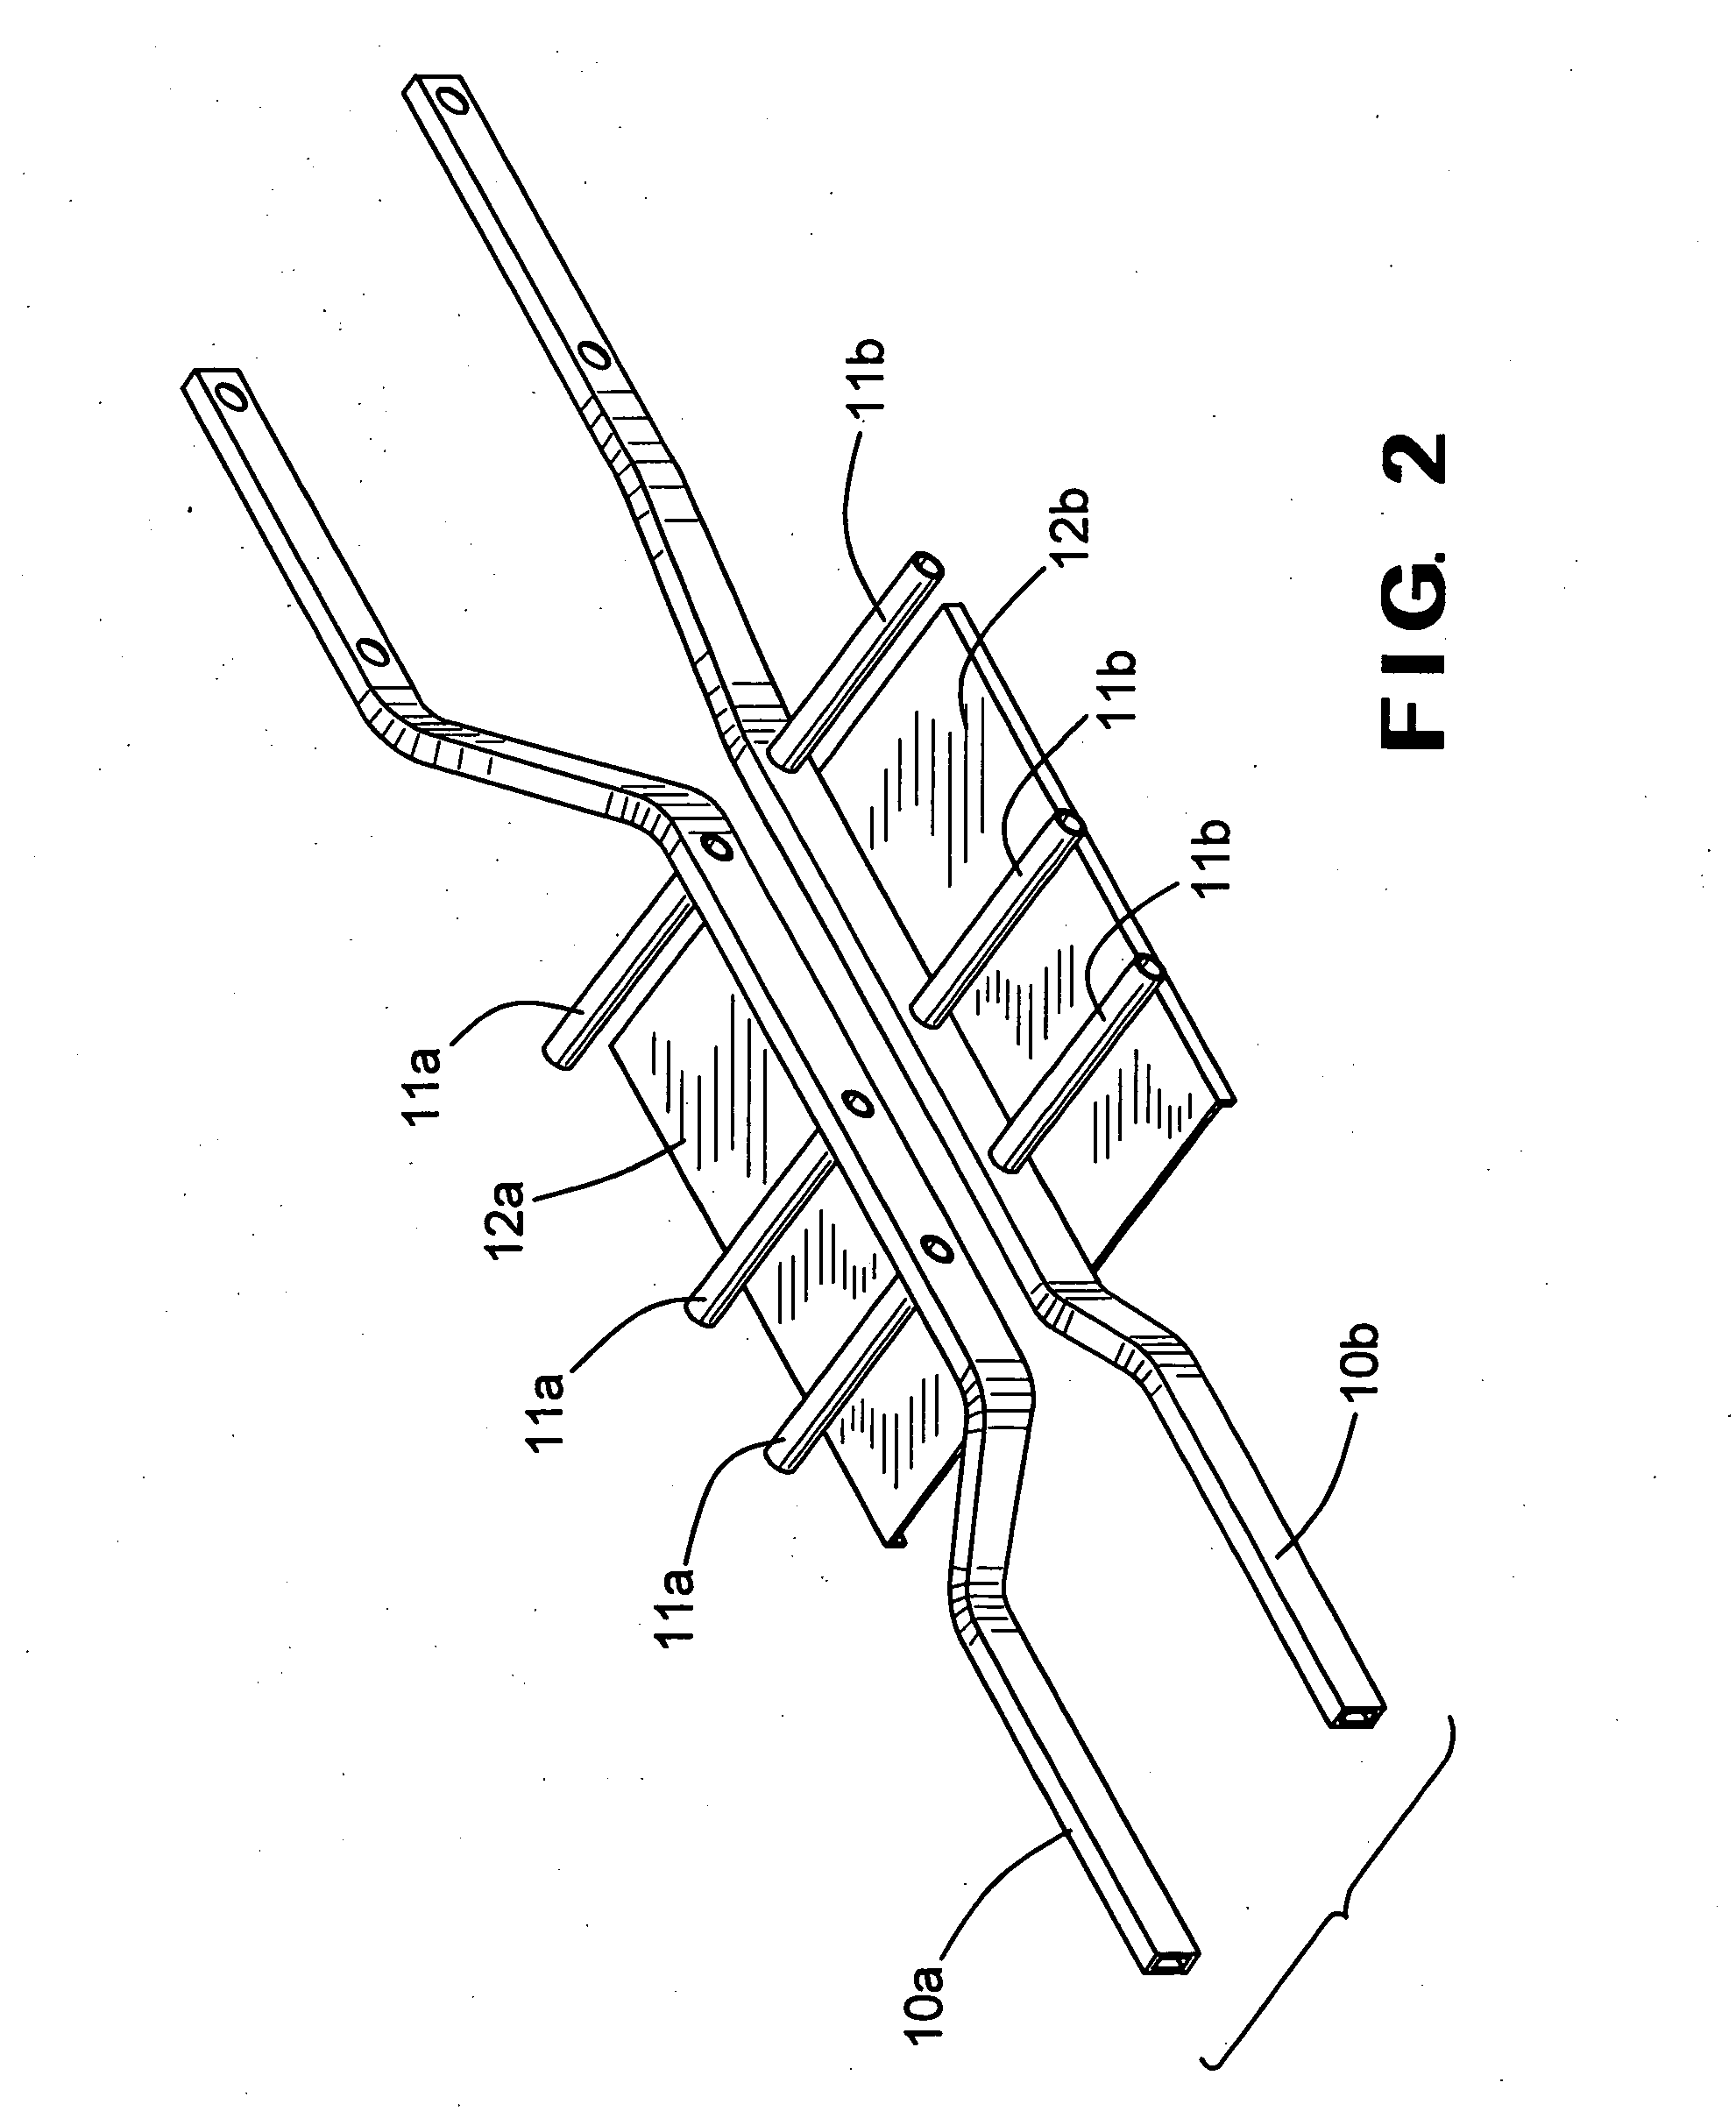 Method of manufacturing a frame assembly